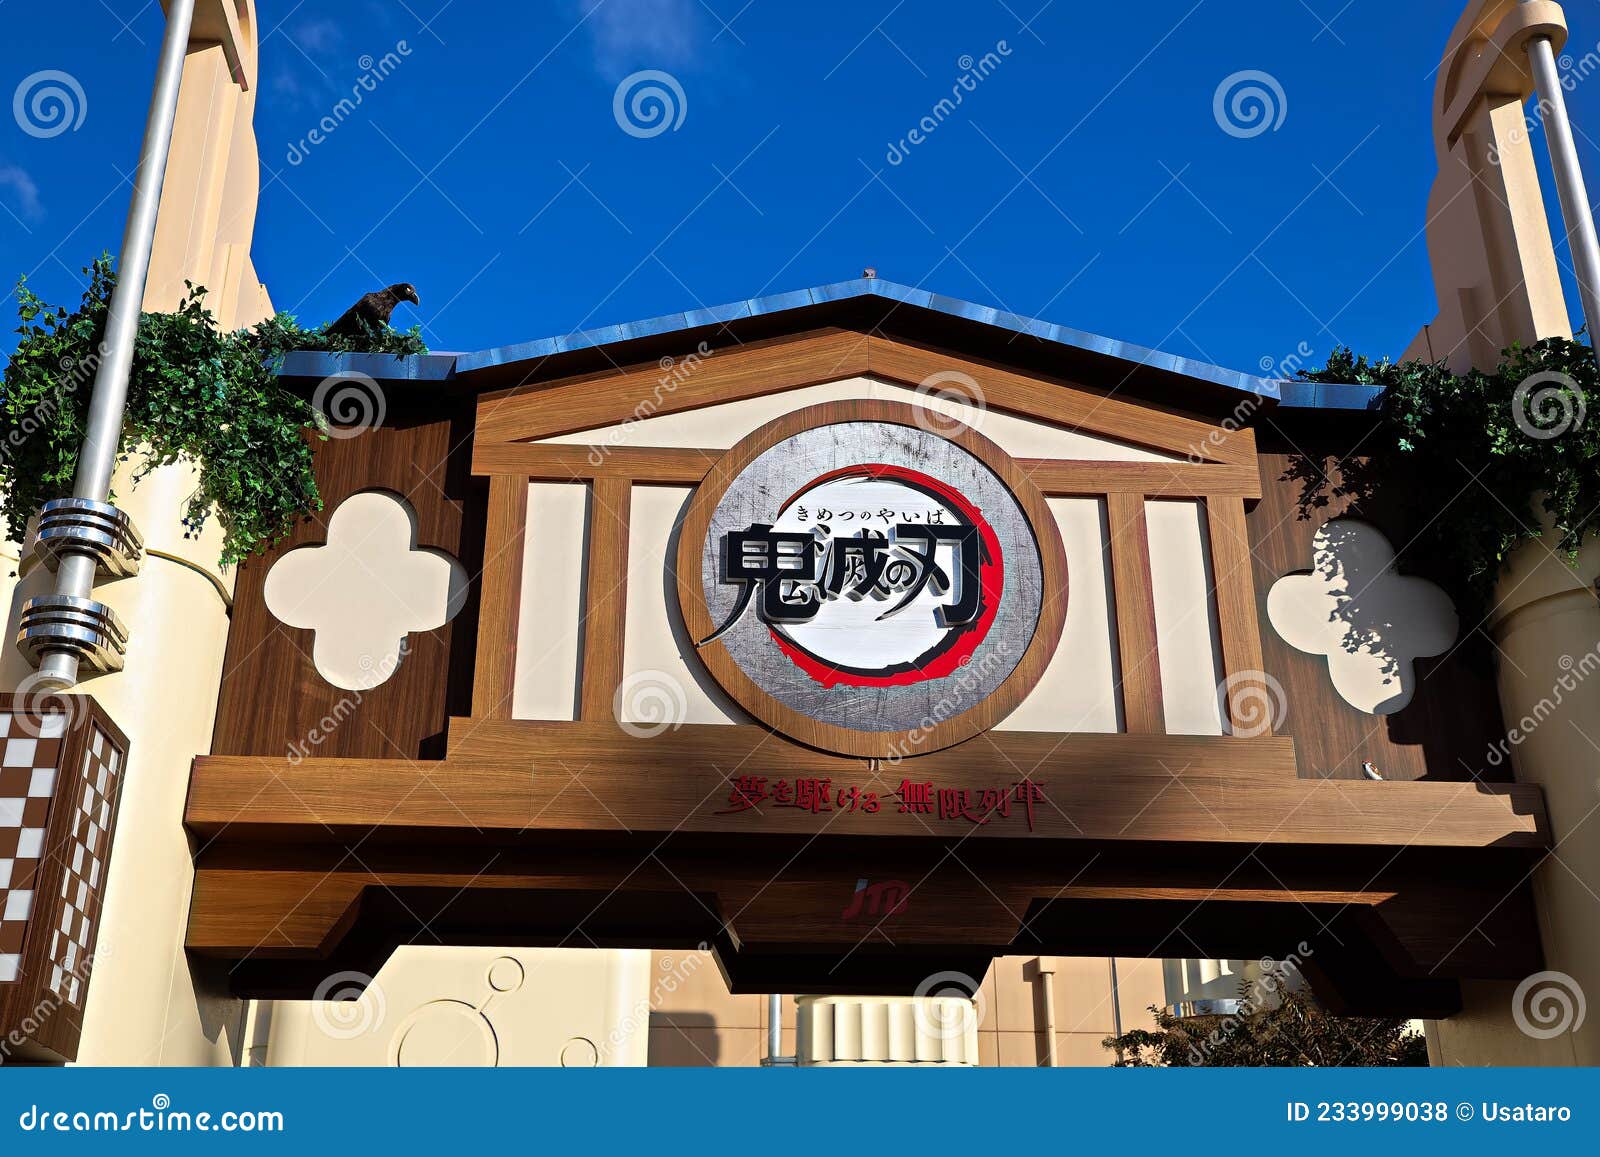 Demon Slayer' attraction to open at Universal Studios Japan - The